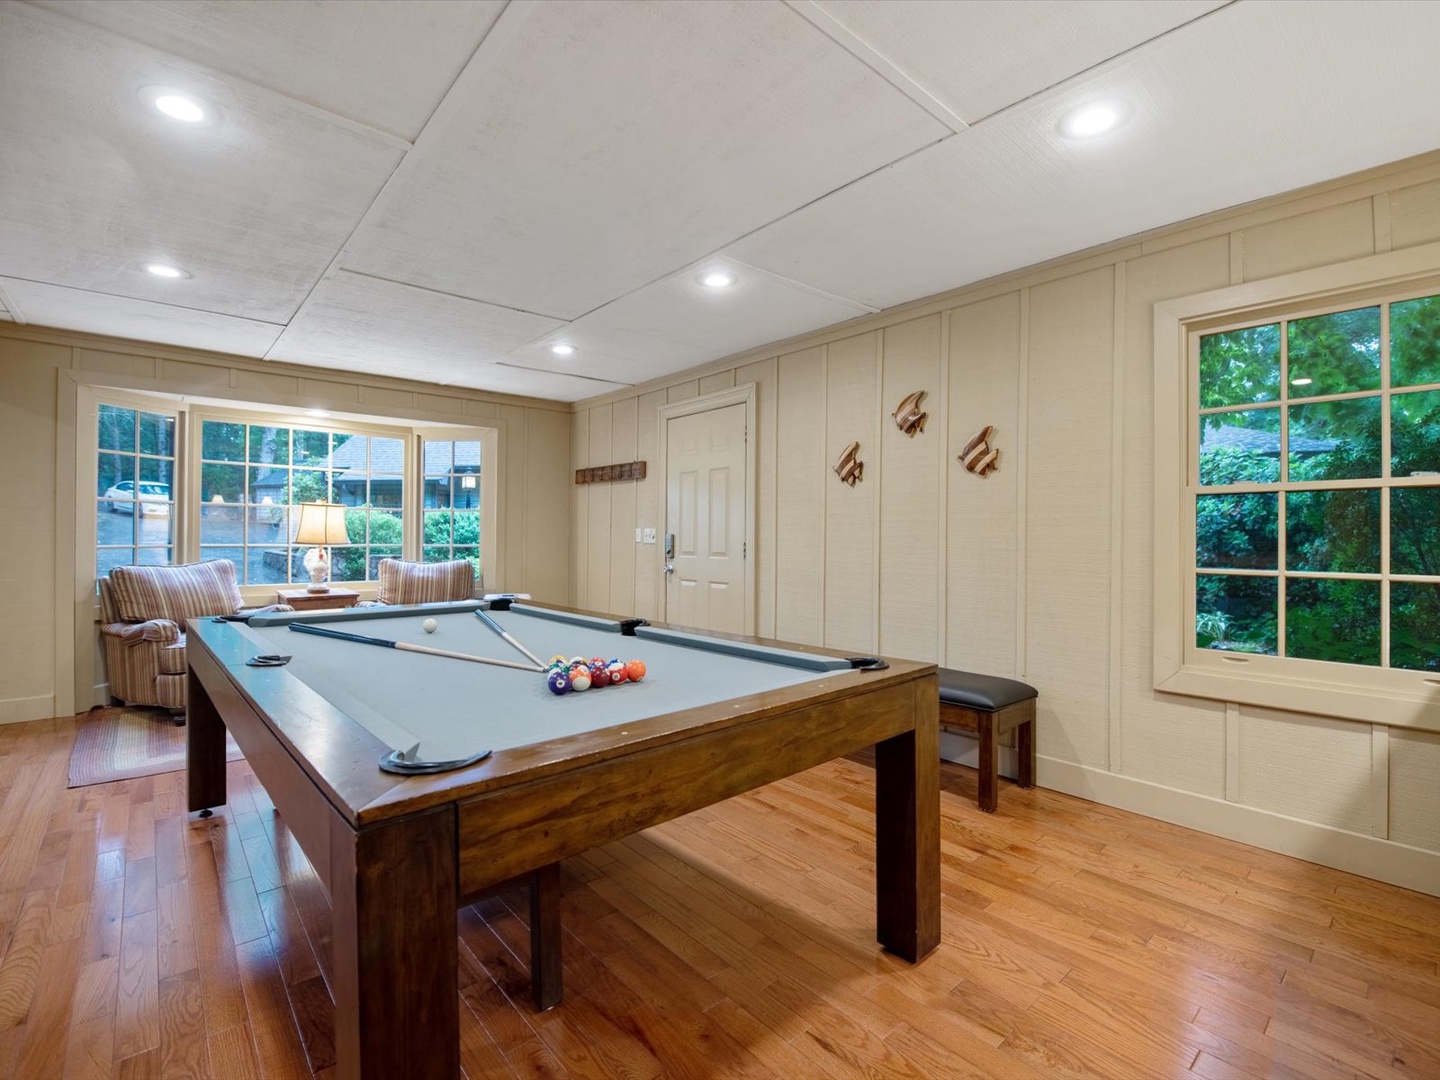 Gleesome Inn- Guest house game room with a pool table